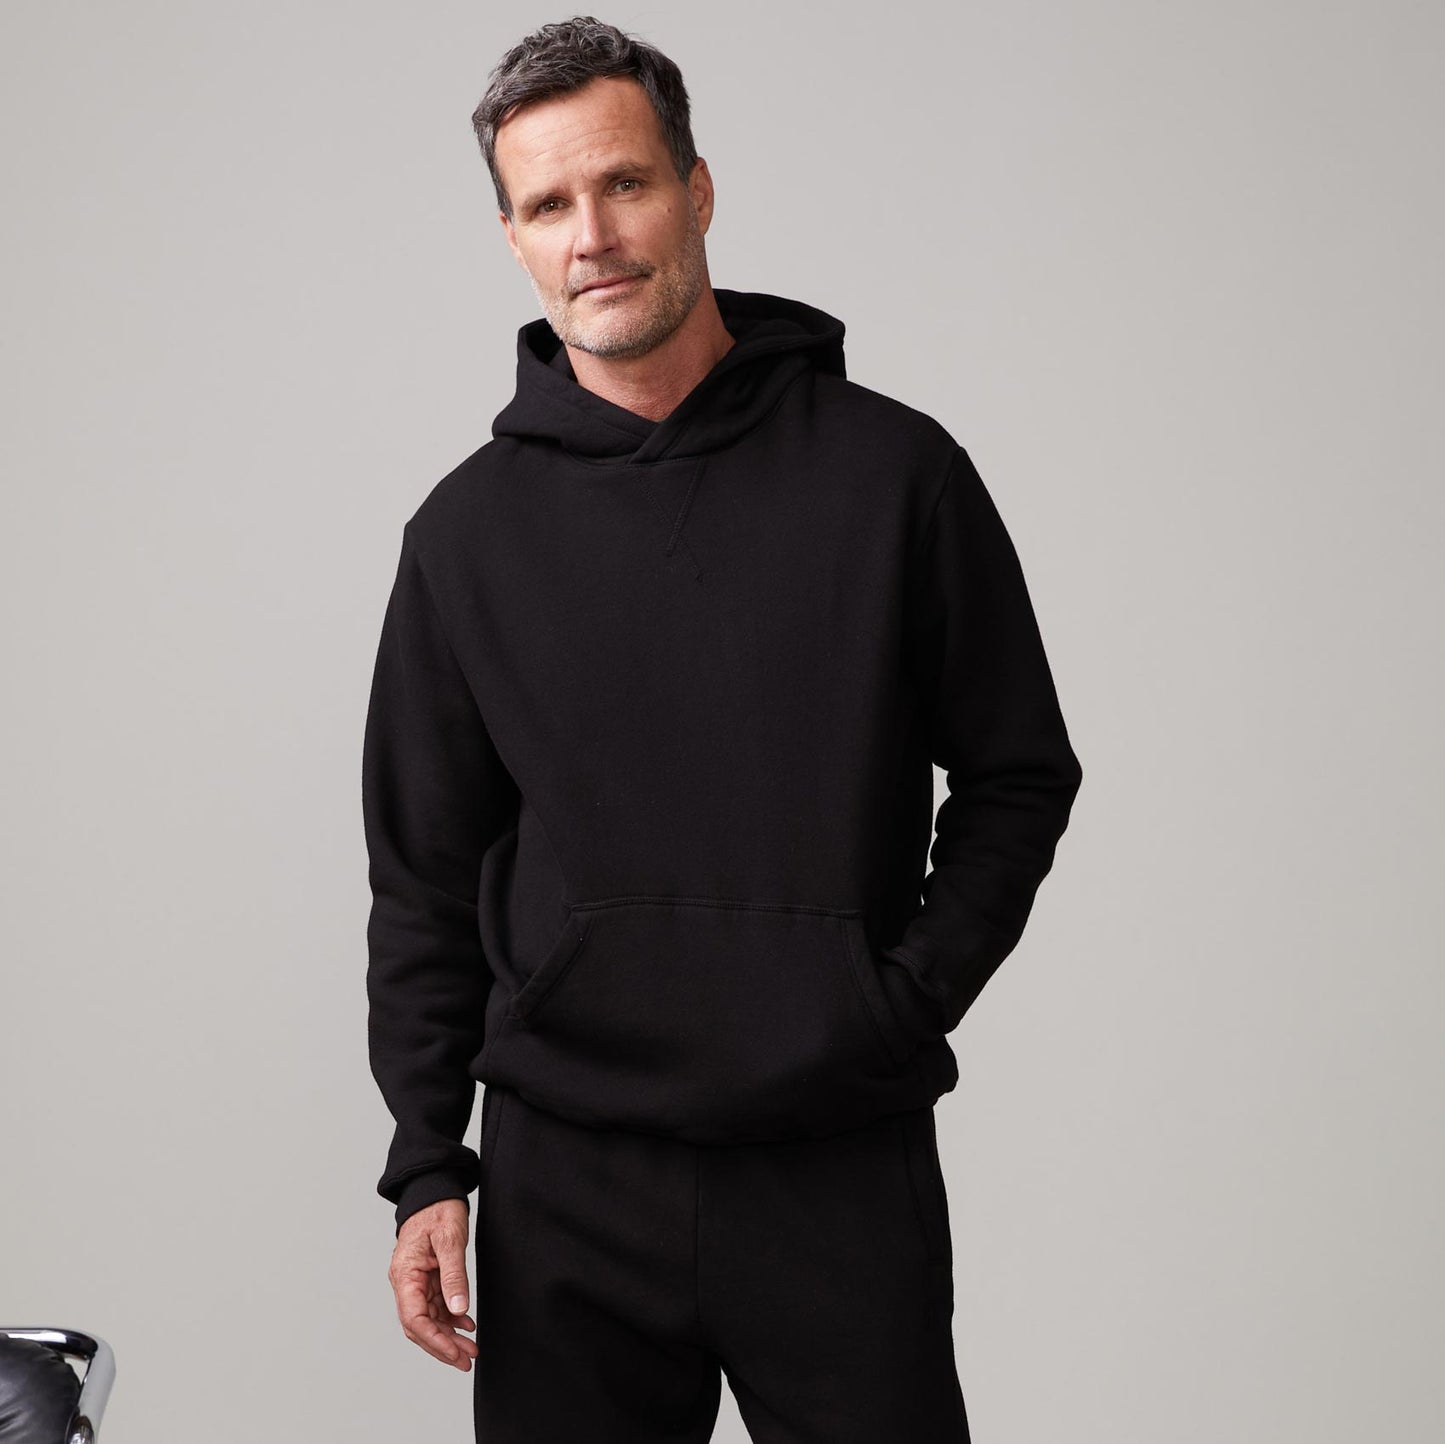 Front view of model wearing the oversized hoody in black.